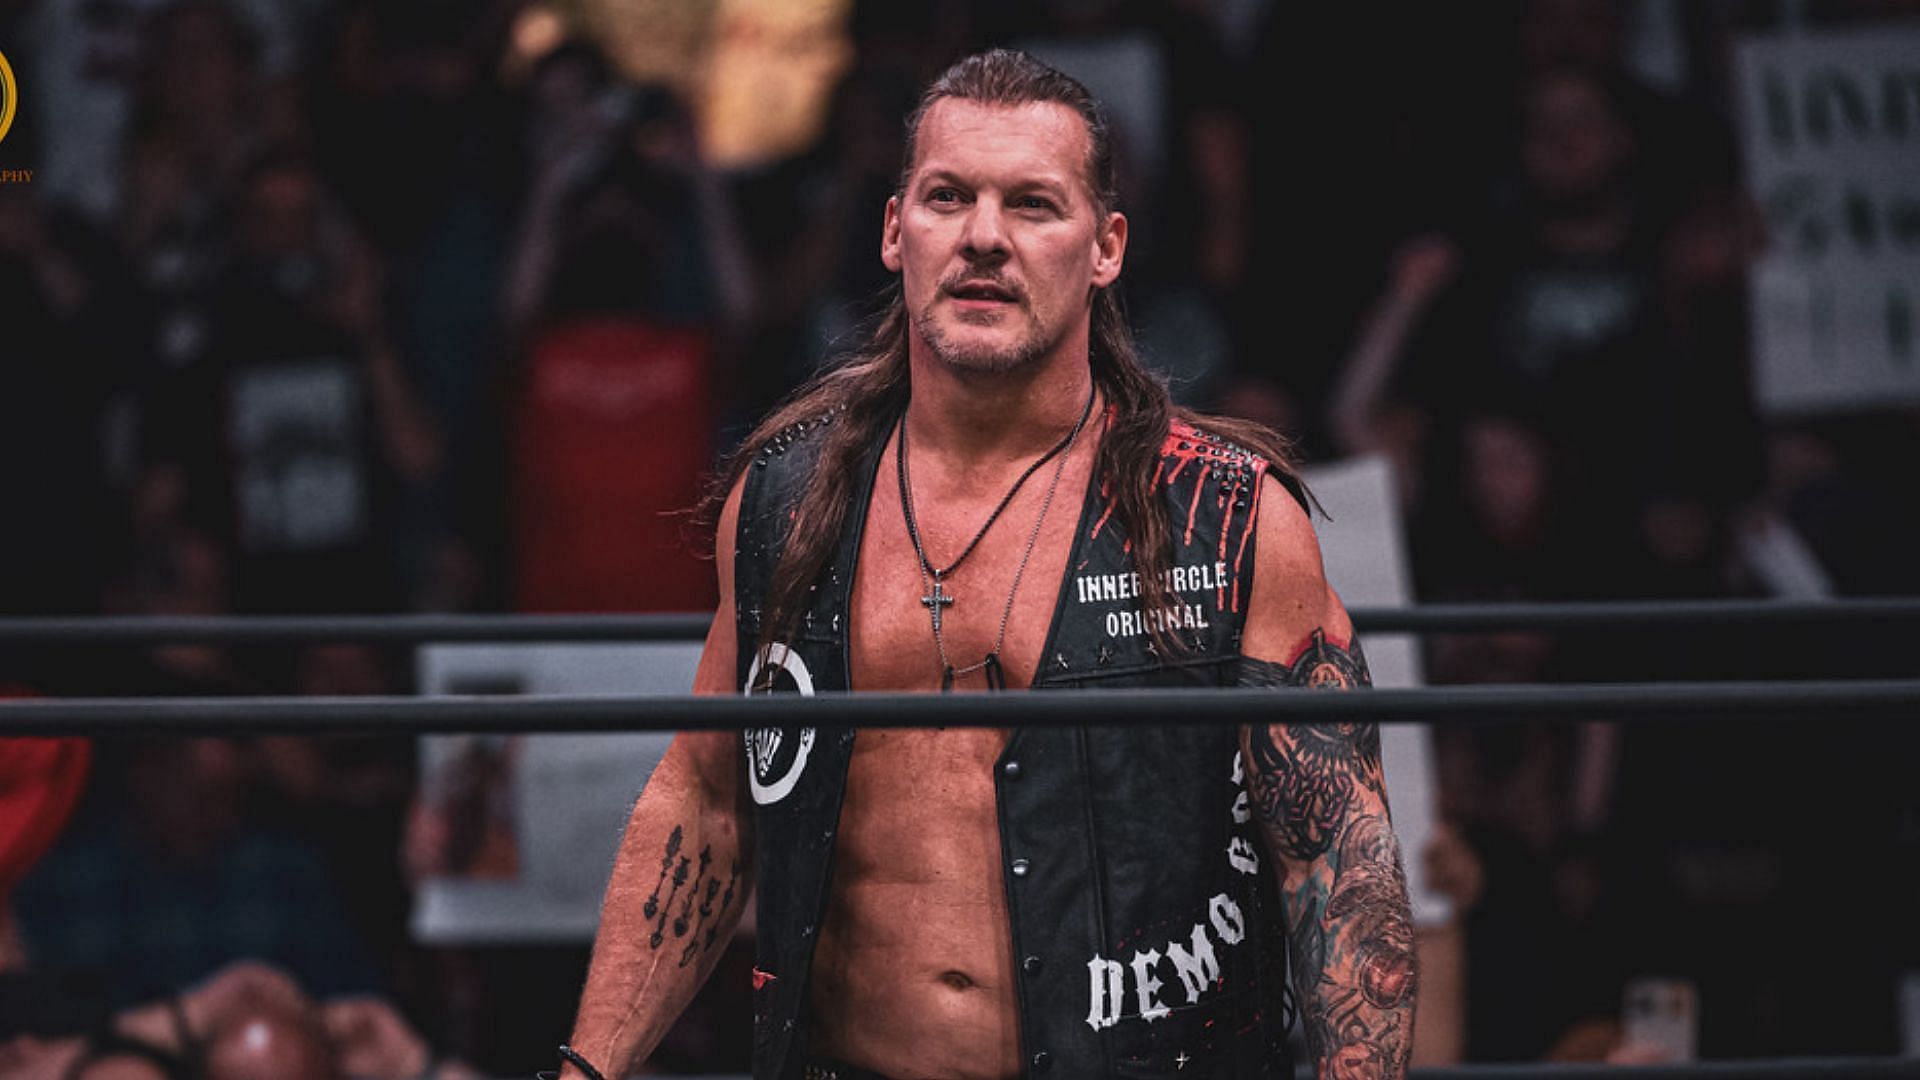 Chris Jericho and his faction had a massive win at AEW Double or Nothing